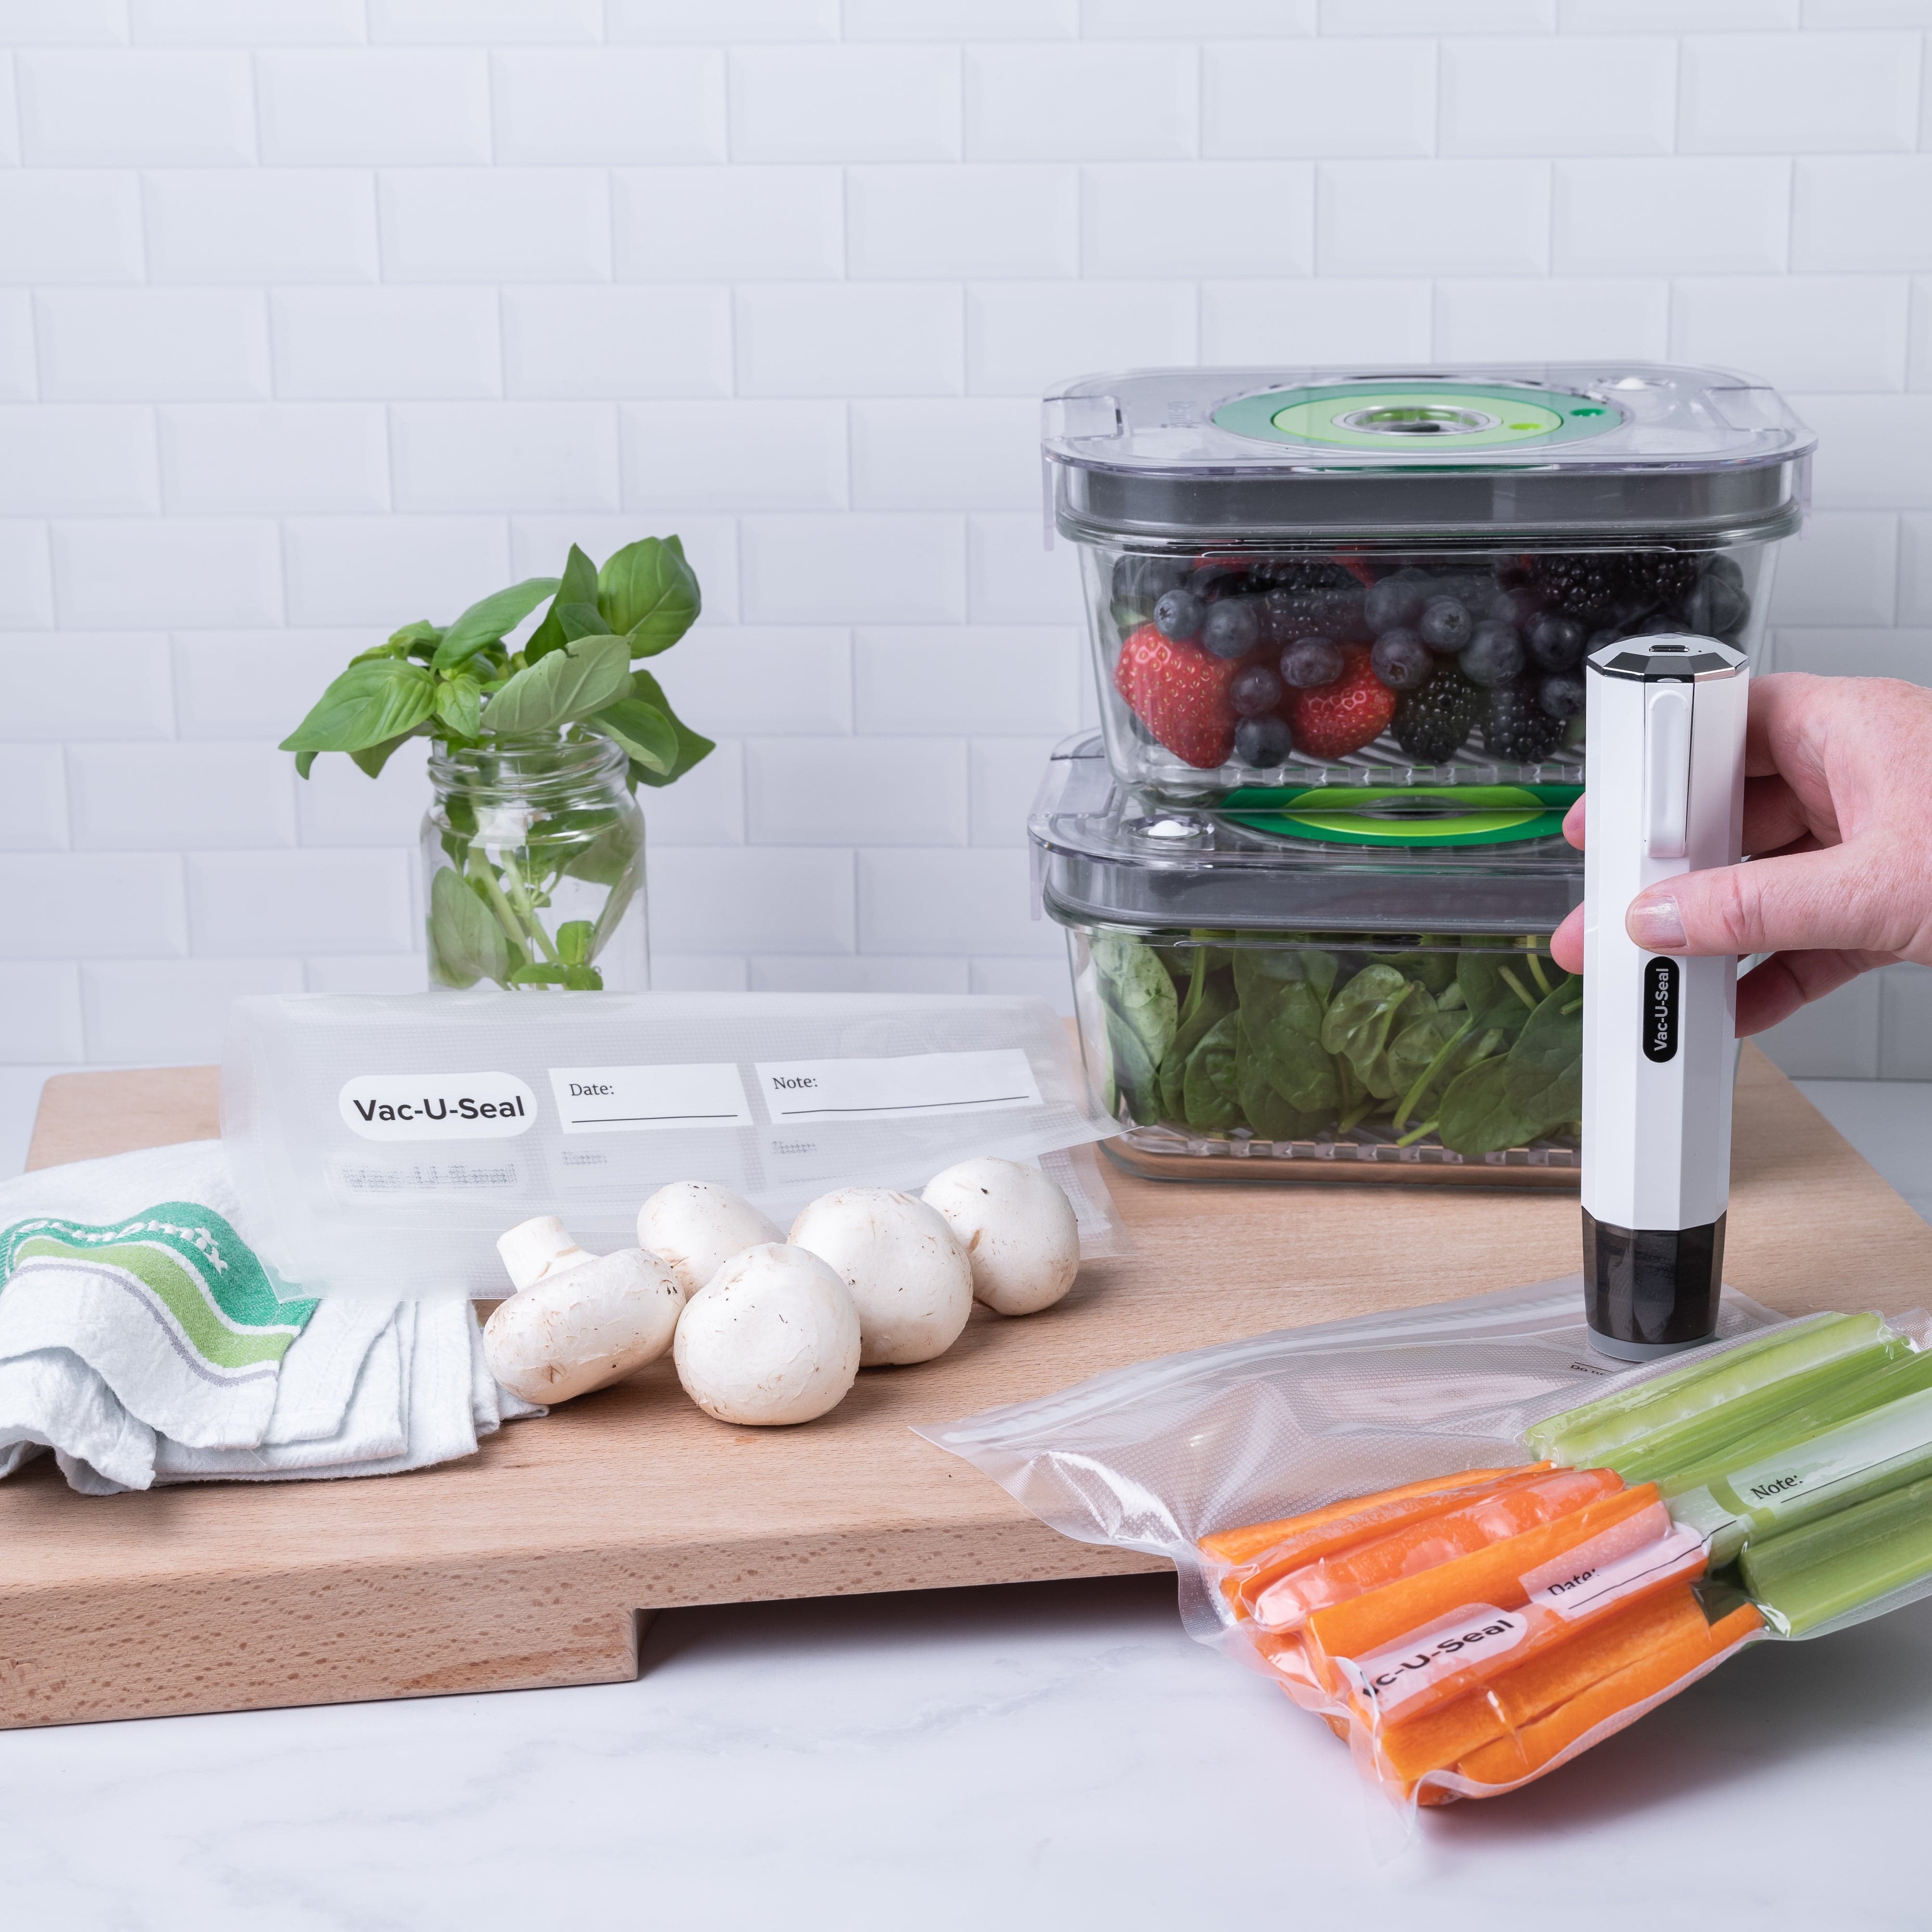 The 5 best vacuum sealers to lock in freshness